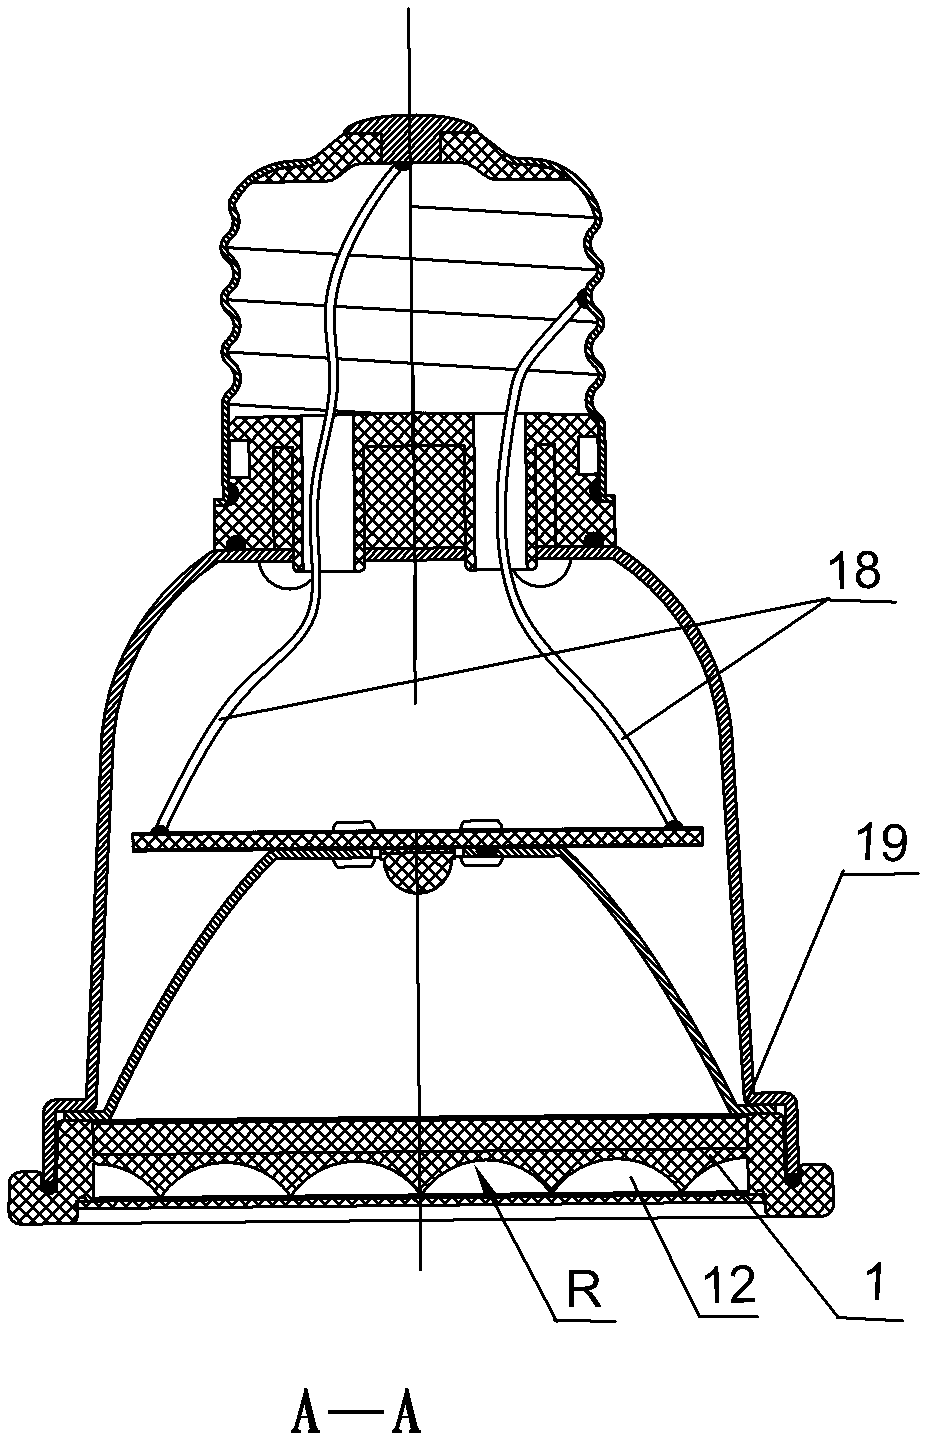 Structure of LED lamp